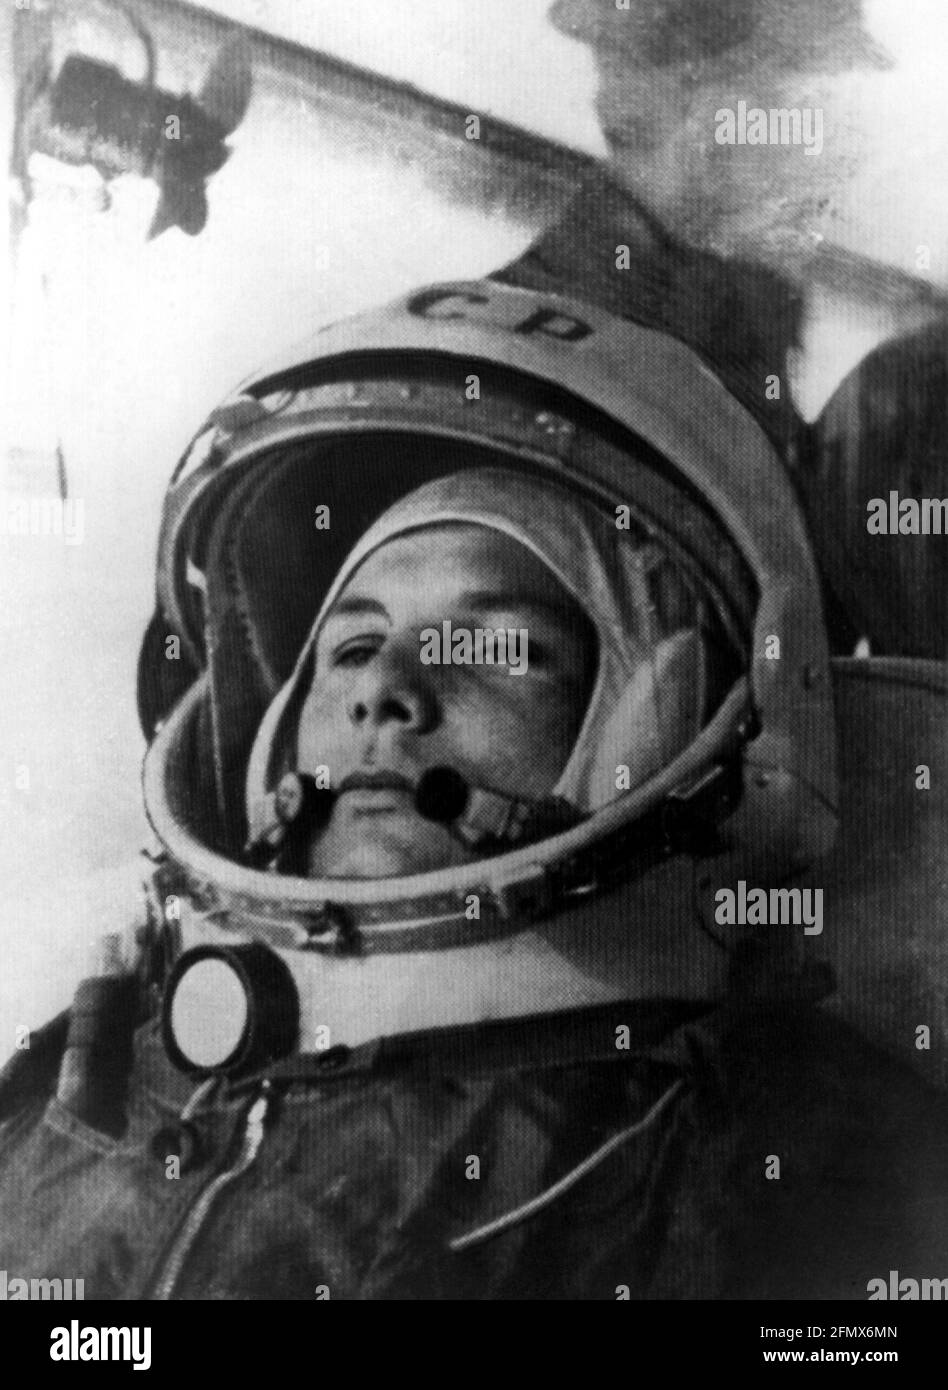 Gagarin, Yuri Alekseyevich, 9.3.1934 - 27.3.1968, Soviet spaceman (cosmonaut), portrait, ADDITIONAL-RIGHTS-CLEARANCE-INFO-NOT-AVAILABLE Stock Photo